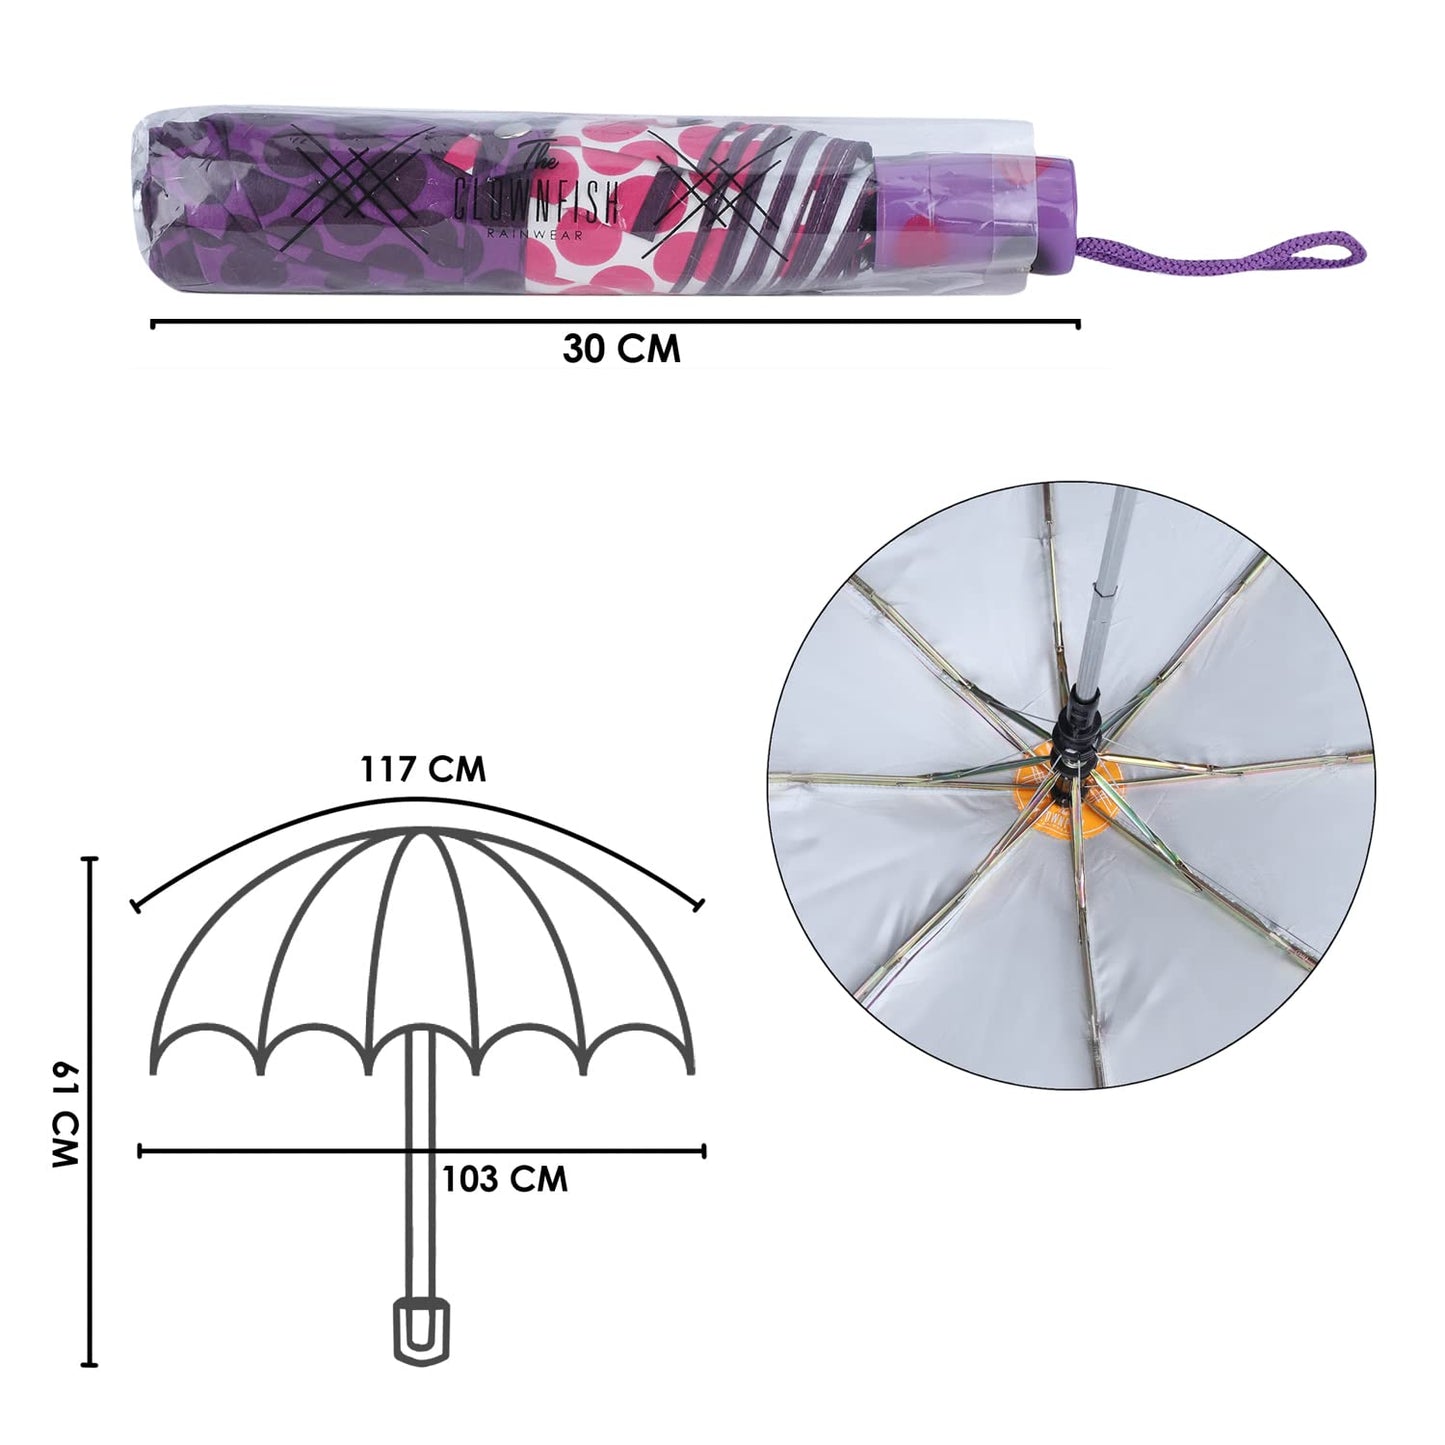 THE CLOWNFISH Umbrella 3 Fold Auto Open Waterproof Pongee Double Coated Silver Lined Umbrellas For Men and Women (Printed Design- Lime)